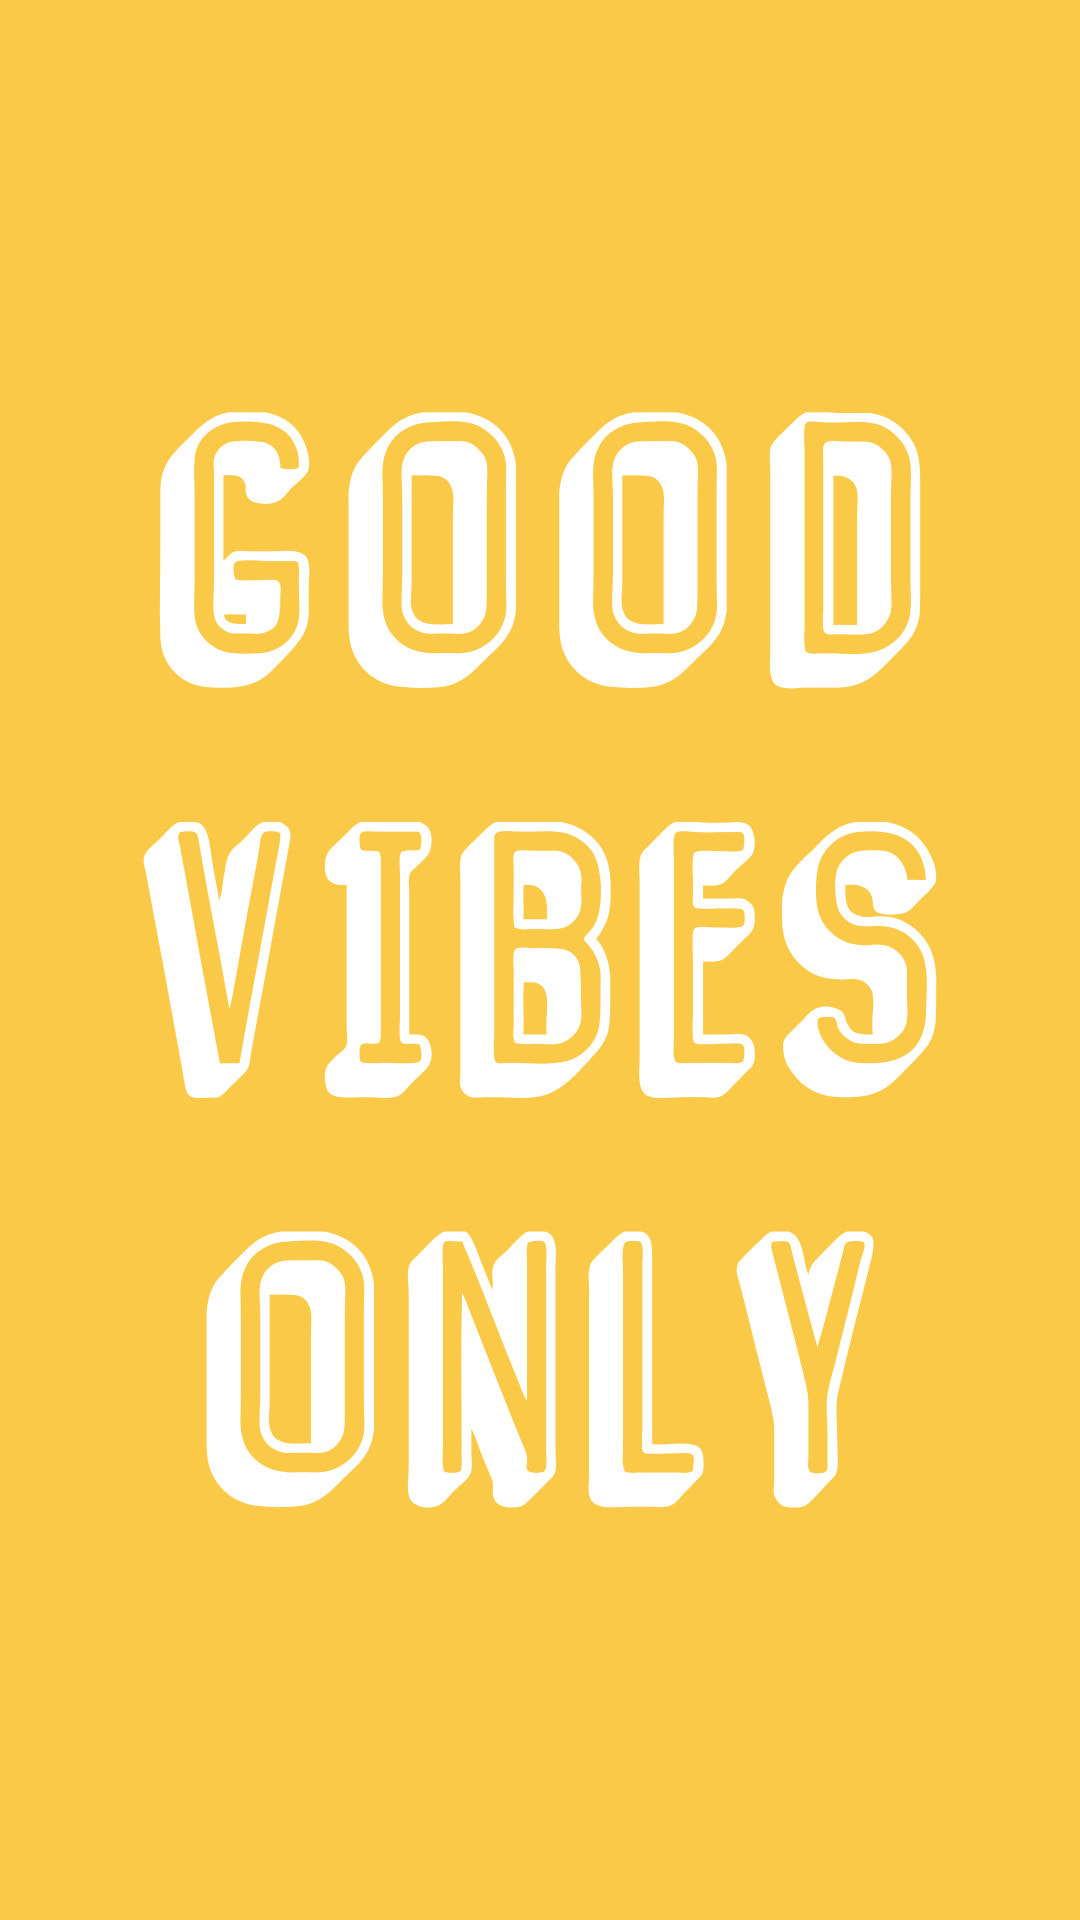 Good Vibes wallpaper by IndieTheHusky  Download on ZEDGE  d371